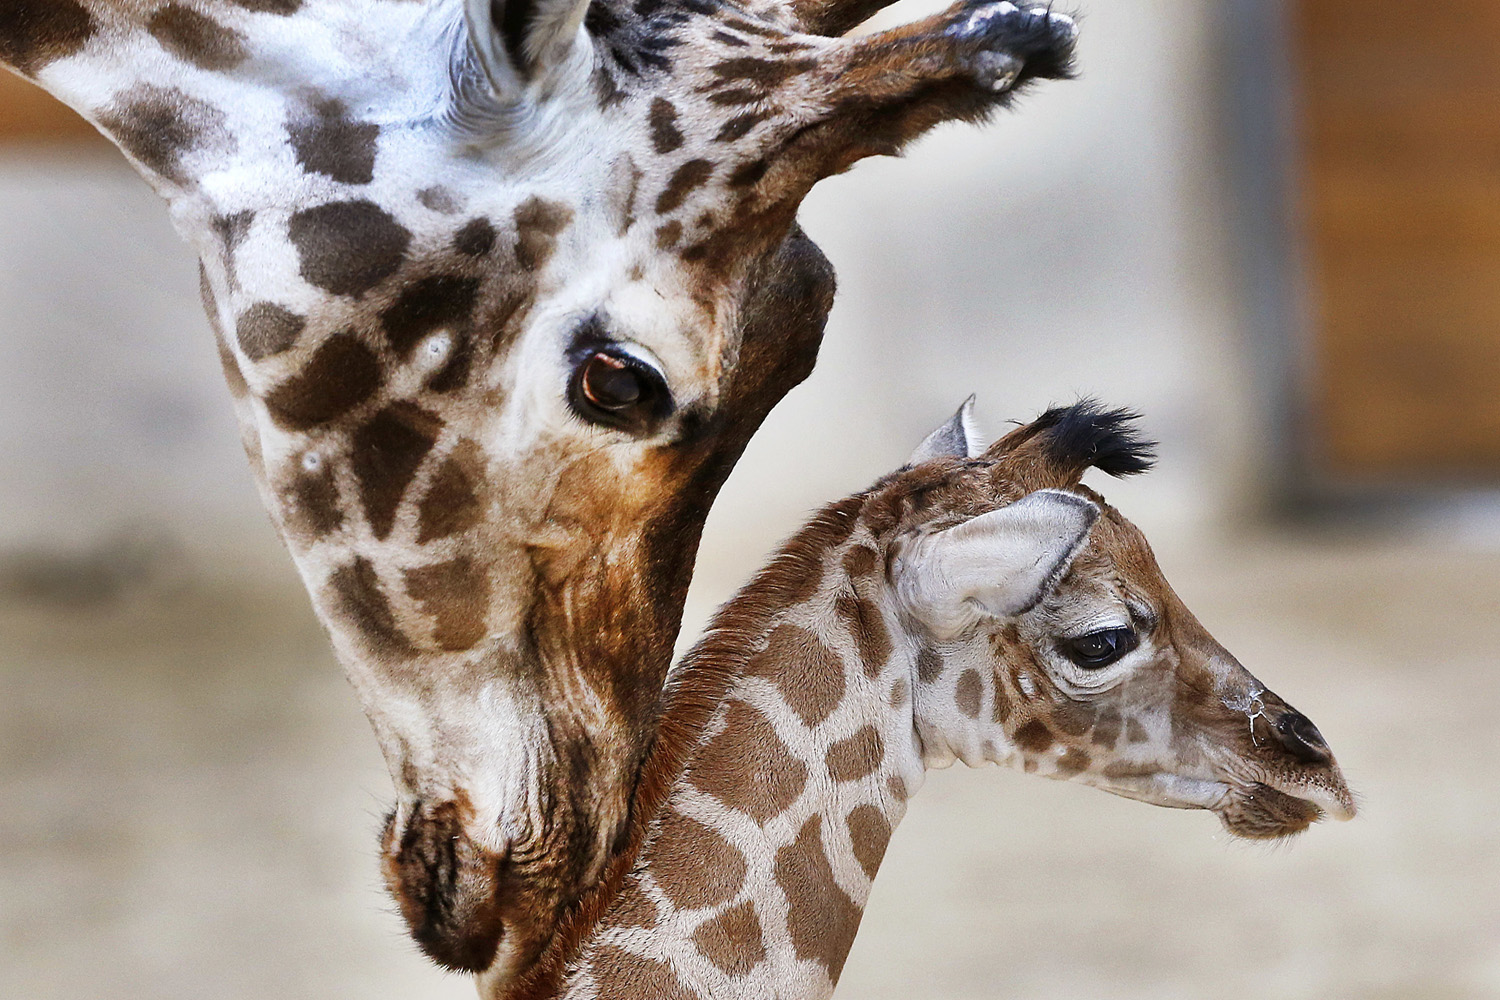 A baby giraffe is nuzzled by its mother